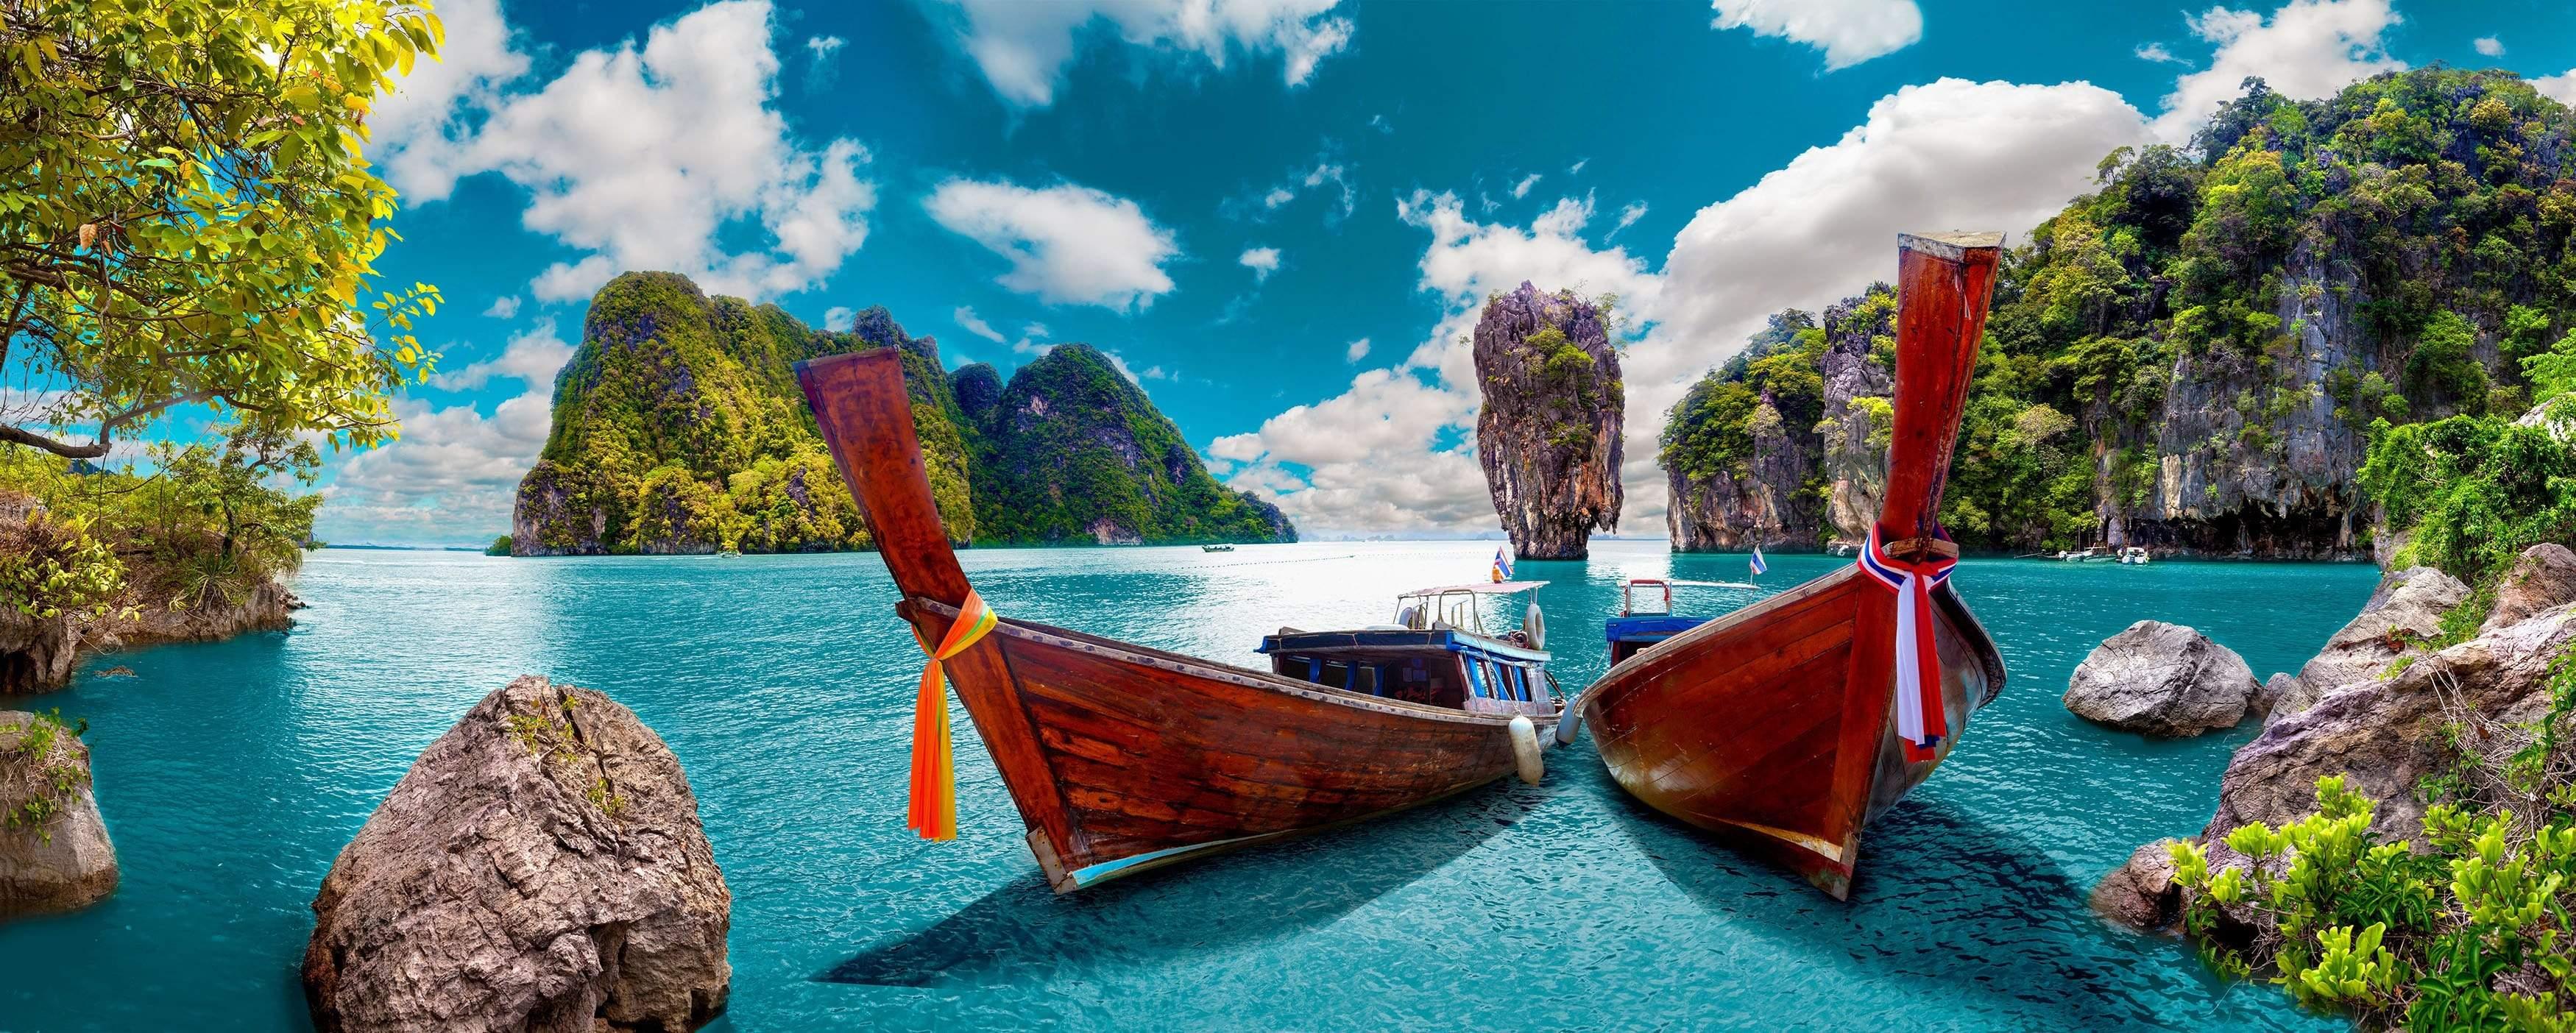 Thailand Rock Tower with 2 boats